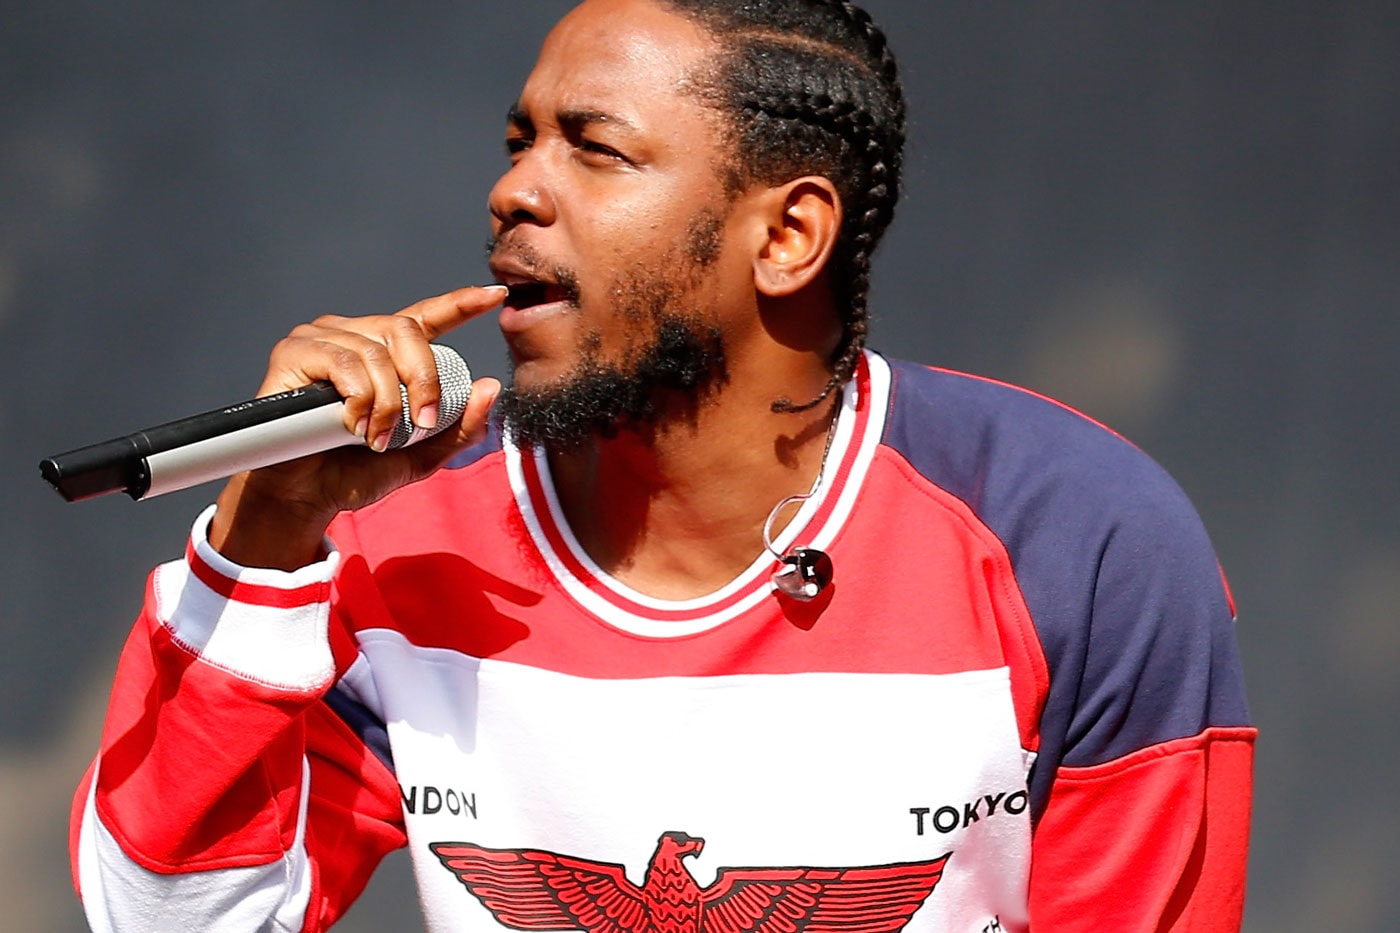 Watch Kendrick Lamar Perform With the National Symphony Orchestra